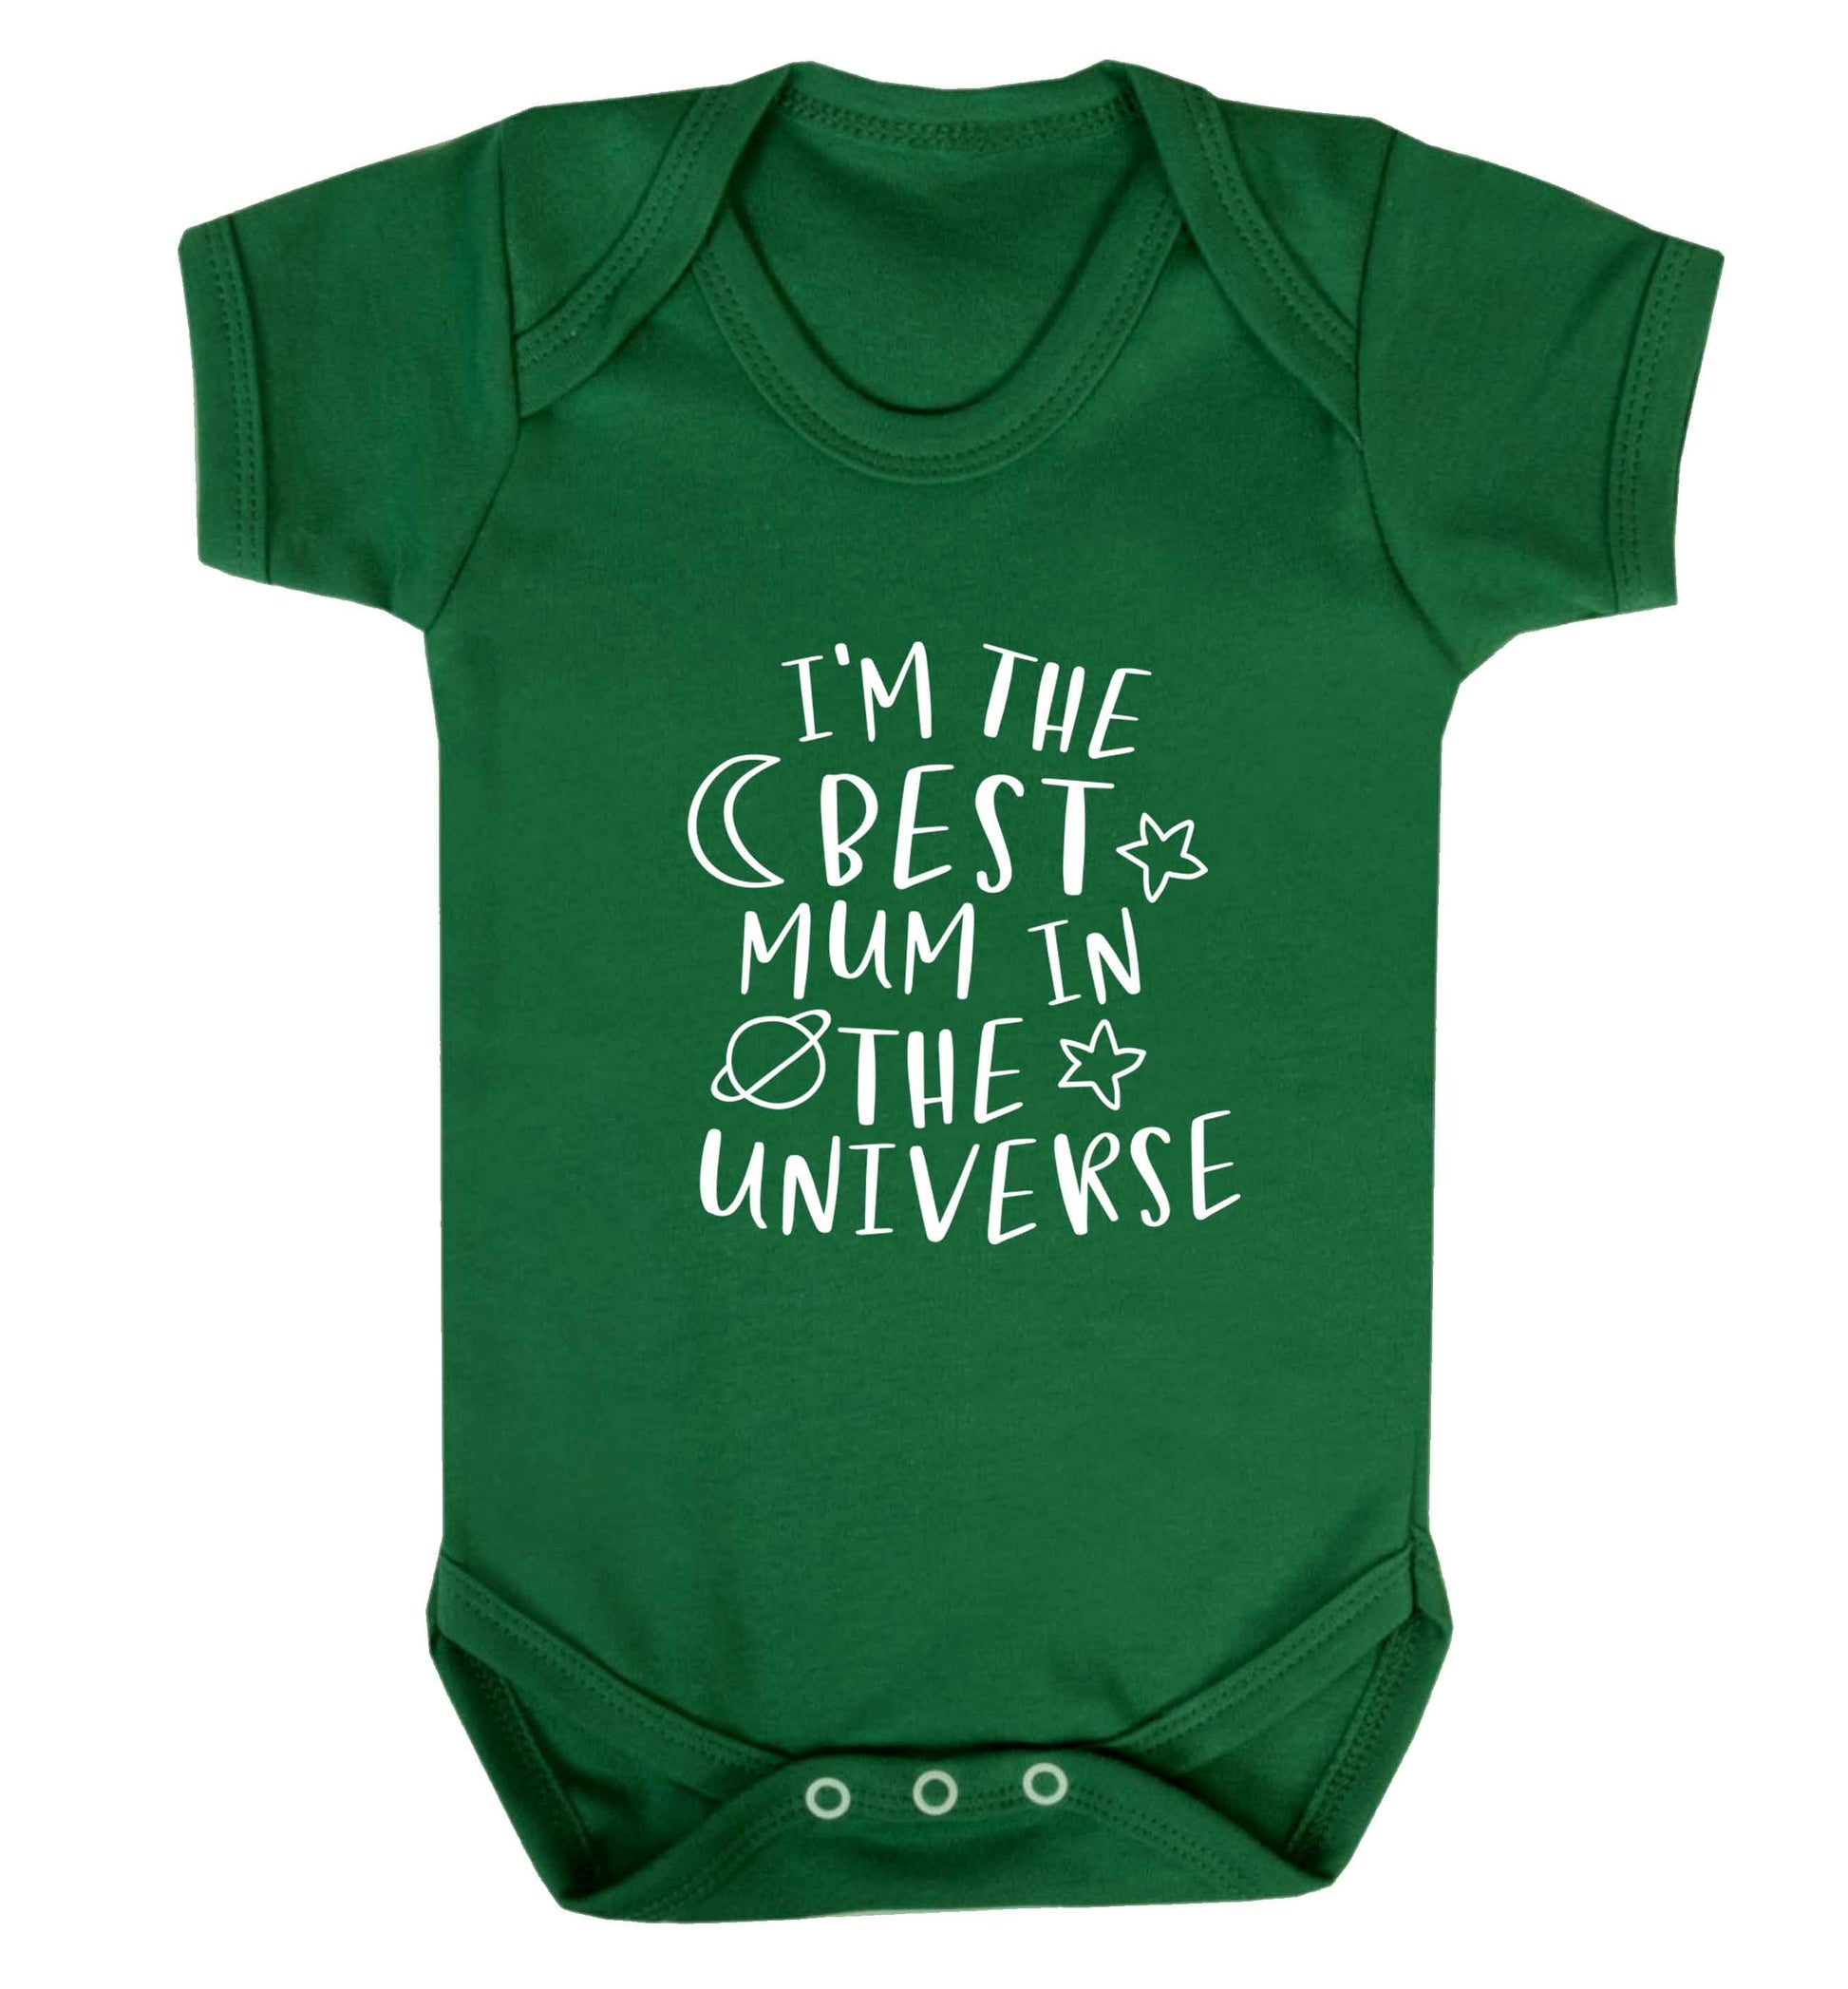 I'm the best mum in the universe baby vest green 18-24 months